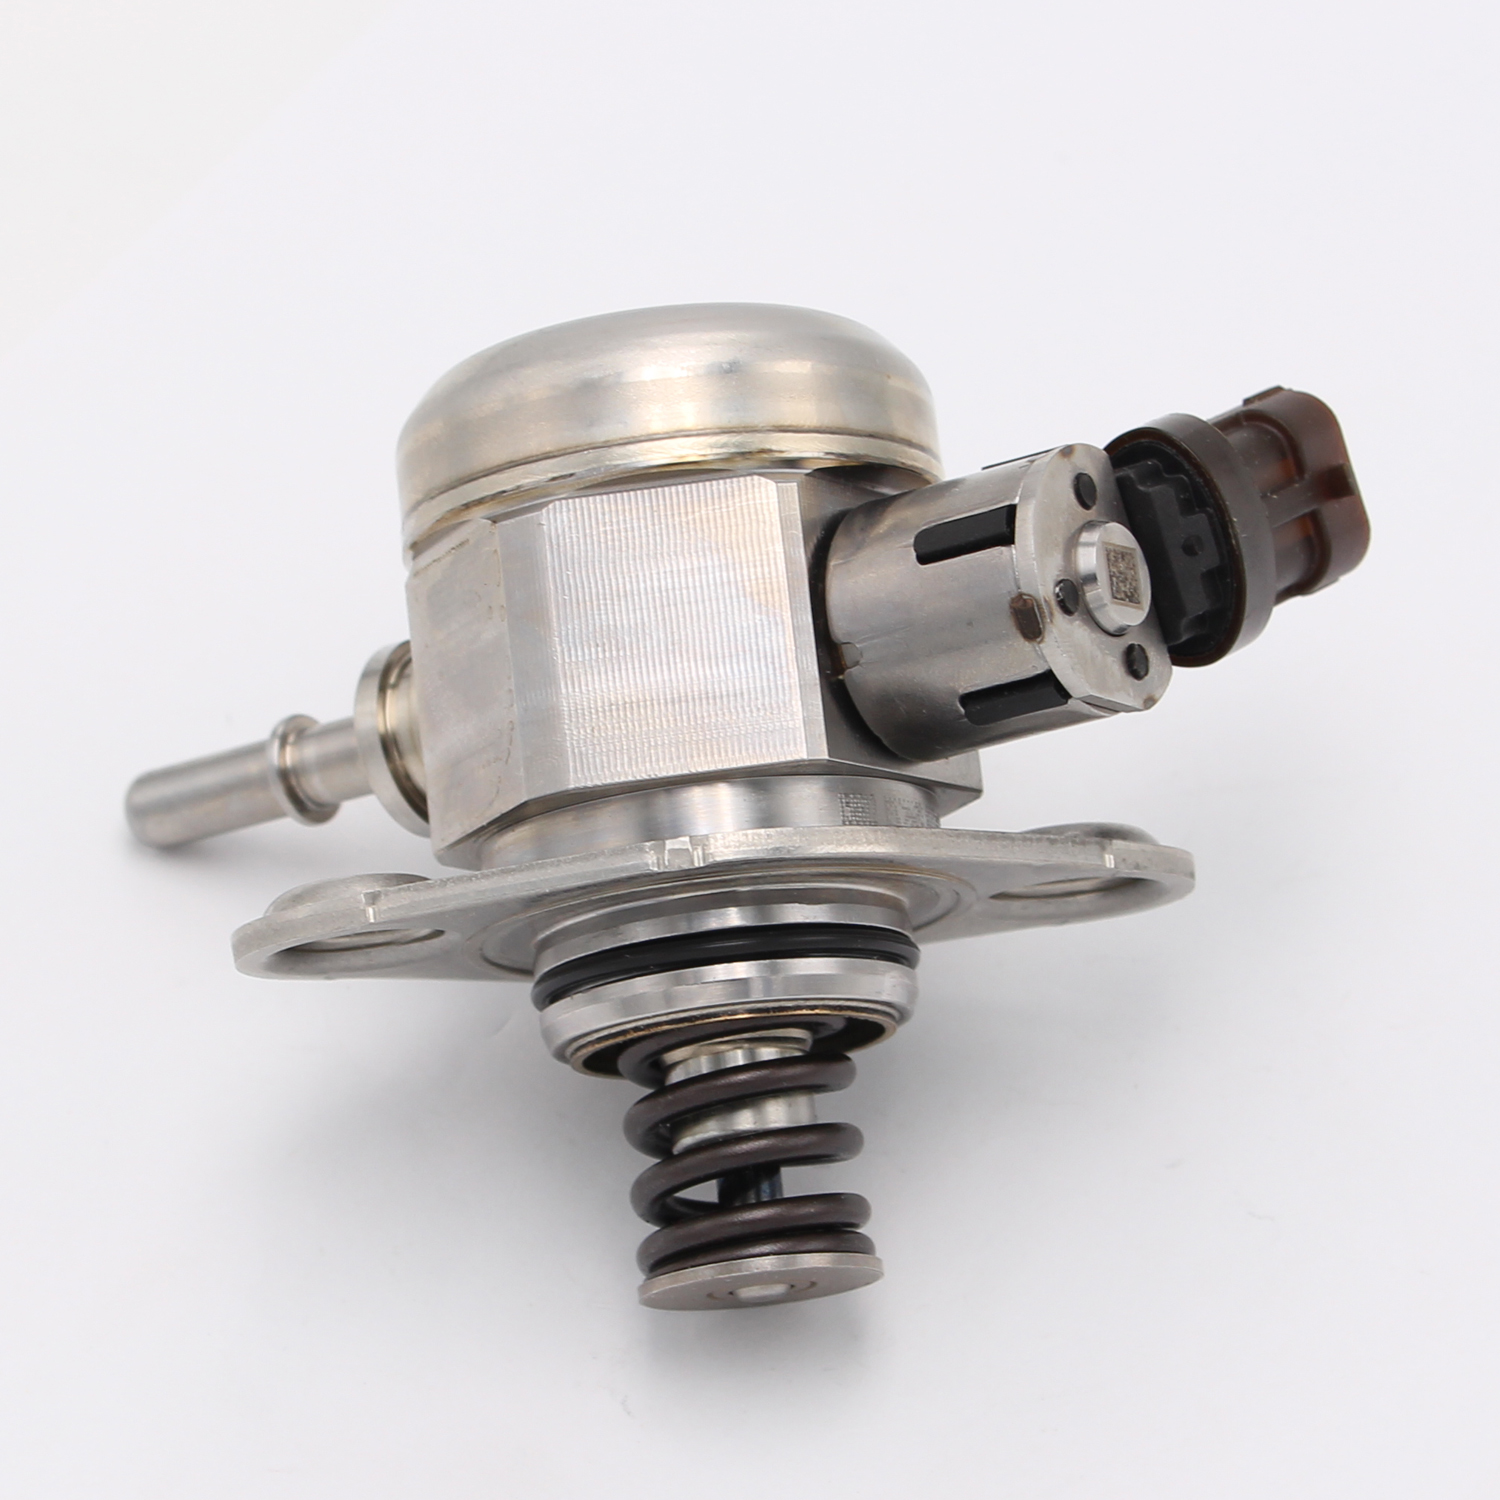 OEM High Pressure Direct Injection Fuel Pump Fits for Hyundai & Kia ...